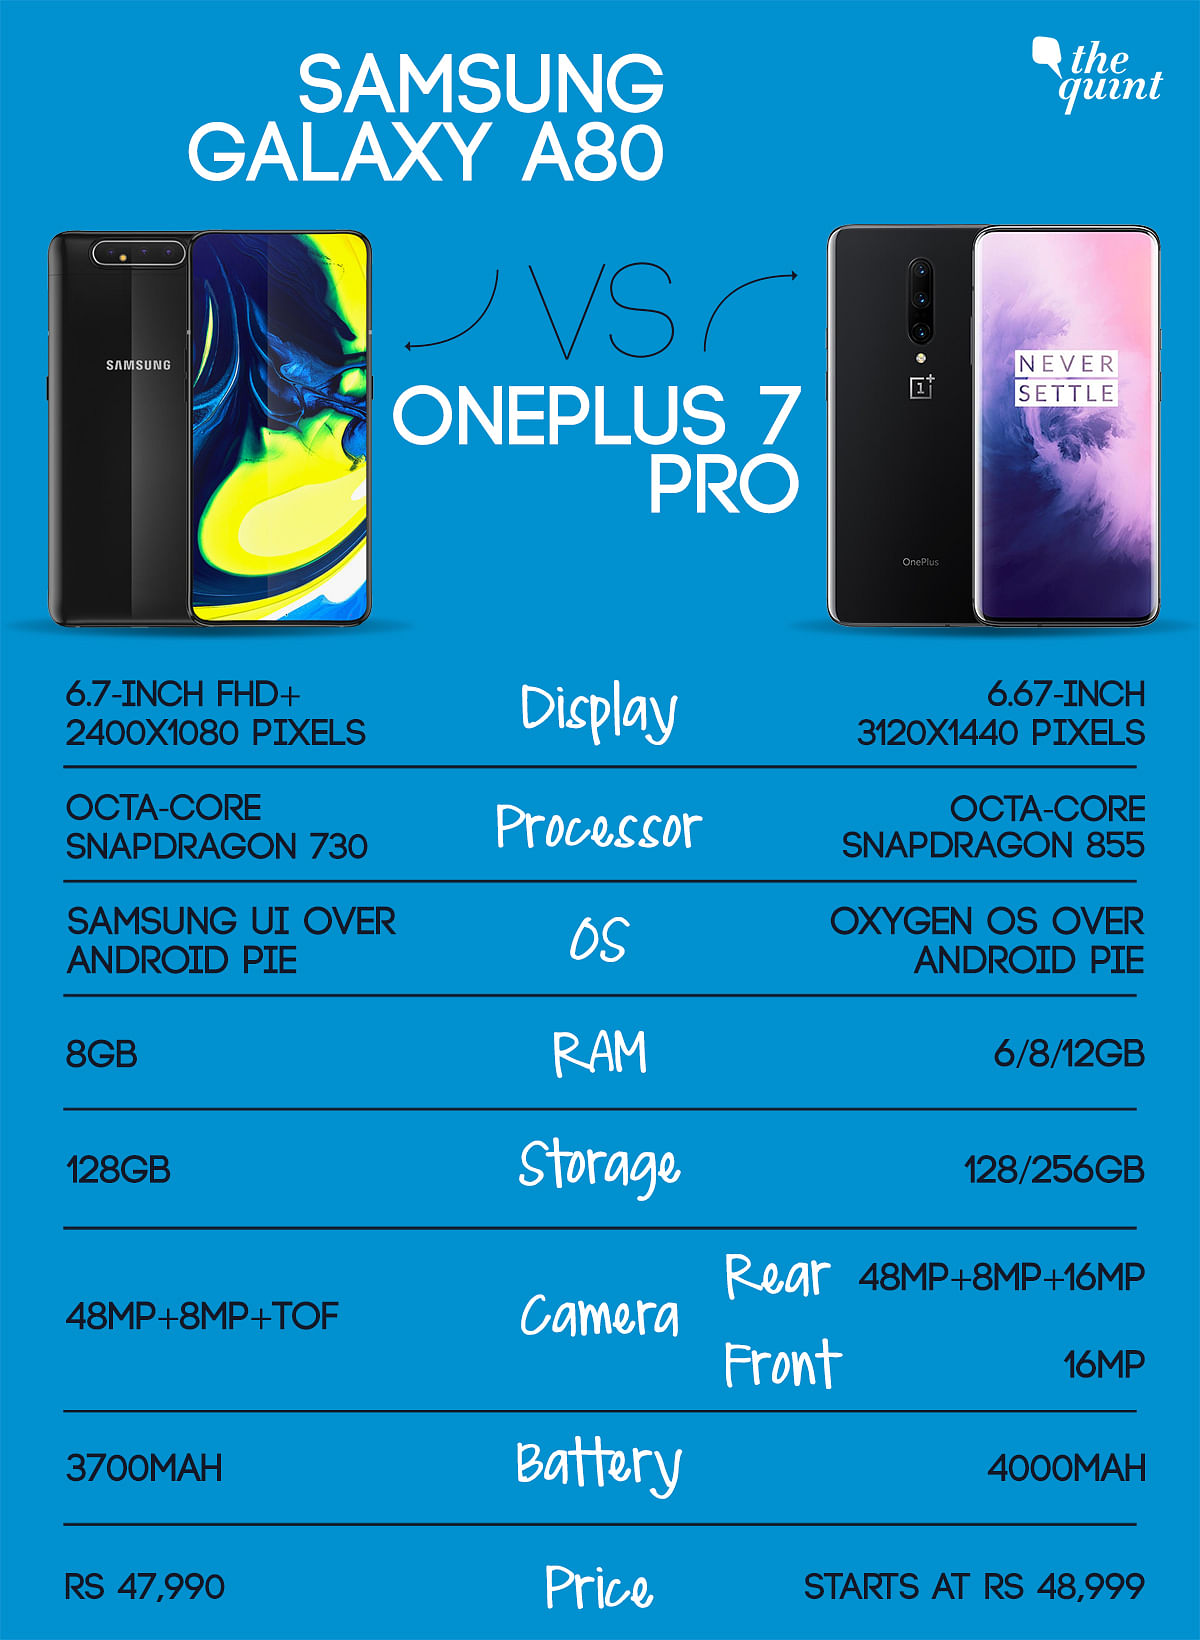 Samsung has launched the Galaxy A80 for 48K and here’s our specs comparison of the phone with OnePlus 7 Pro.